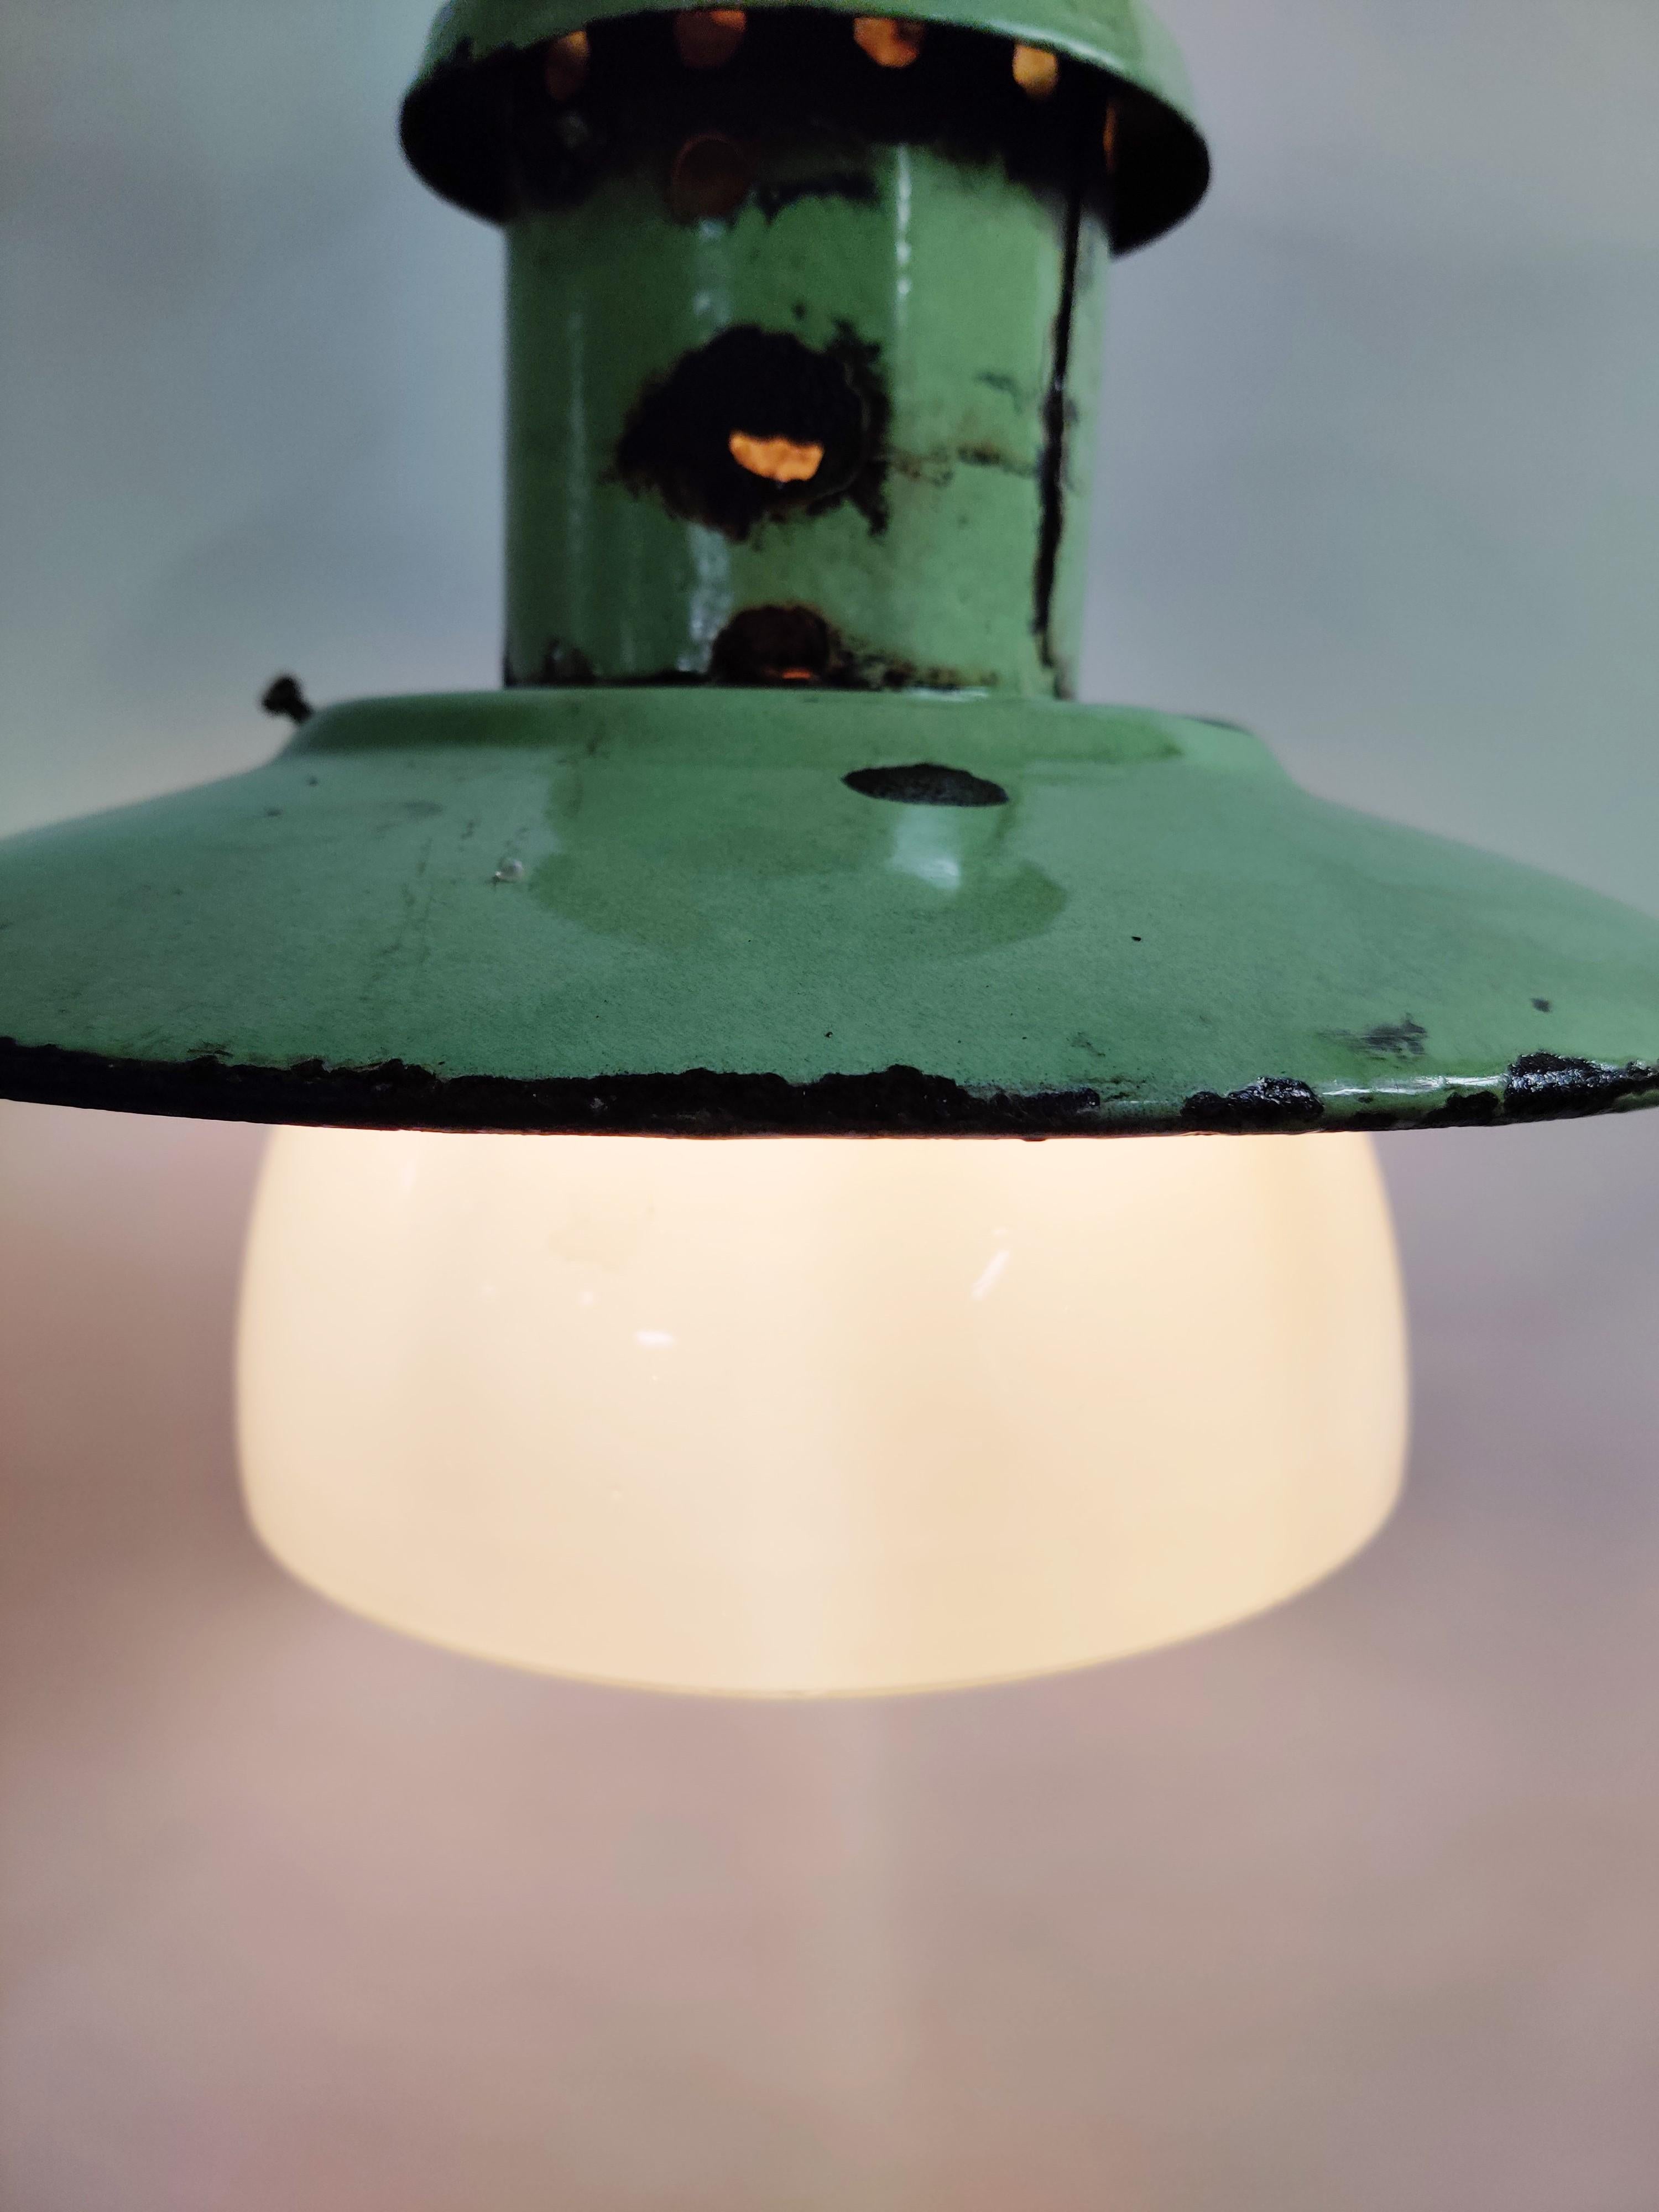 Vintage enamel green Industrial street light with opaline glass shade.

Beautiful original condition.

The lamp emits a beautiful warm light thanks to the opaline lamp shade.

Rewired, tested and ready for use with a regular E27 light